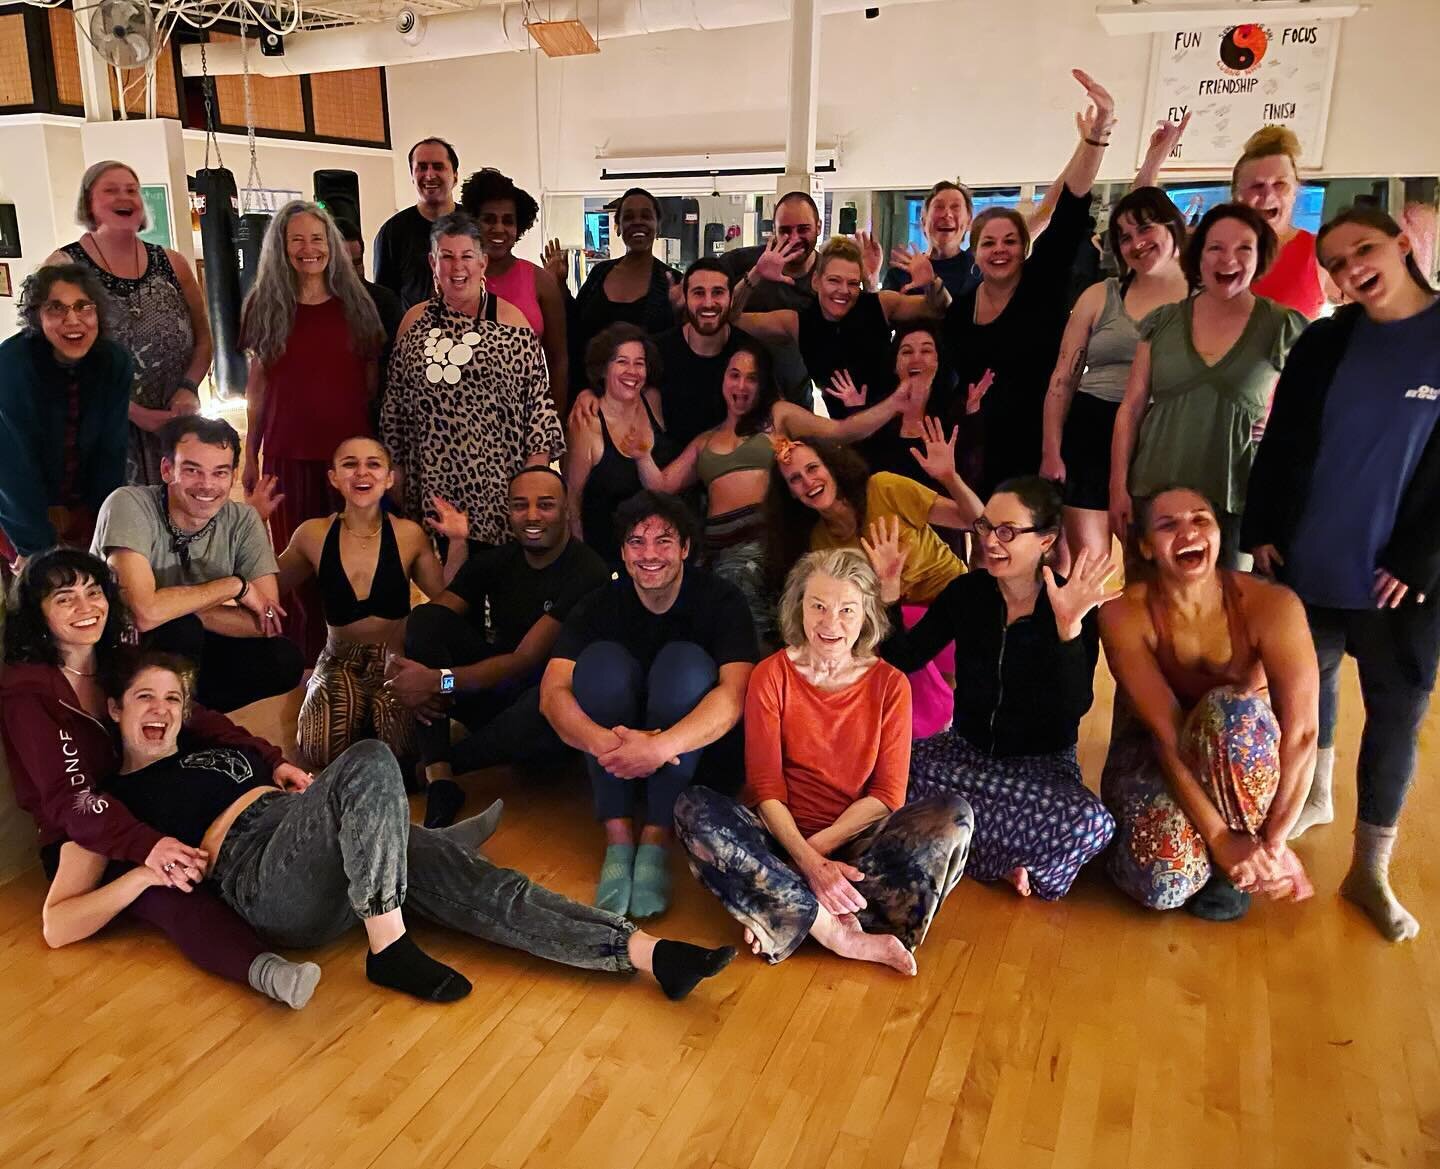 These beautiful lovely dancers!! TWO YEARS of holding this room down and it&rsquo;s FULL of vibrantly alive people of all ages, shapes and abilities. We&rsquo;ll be at 50-60 folks real soon, I can feel it. I want to give a shout out to my crew Neil B